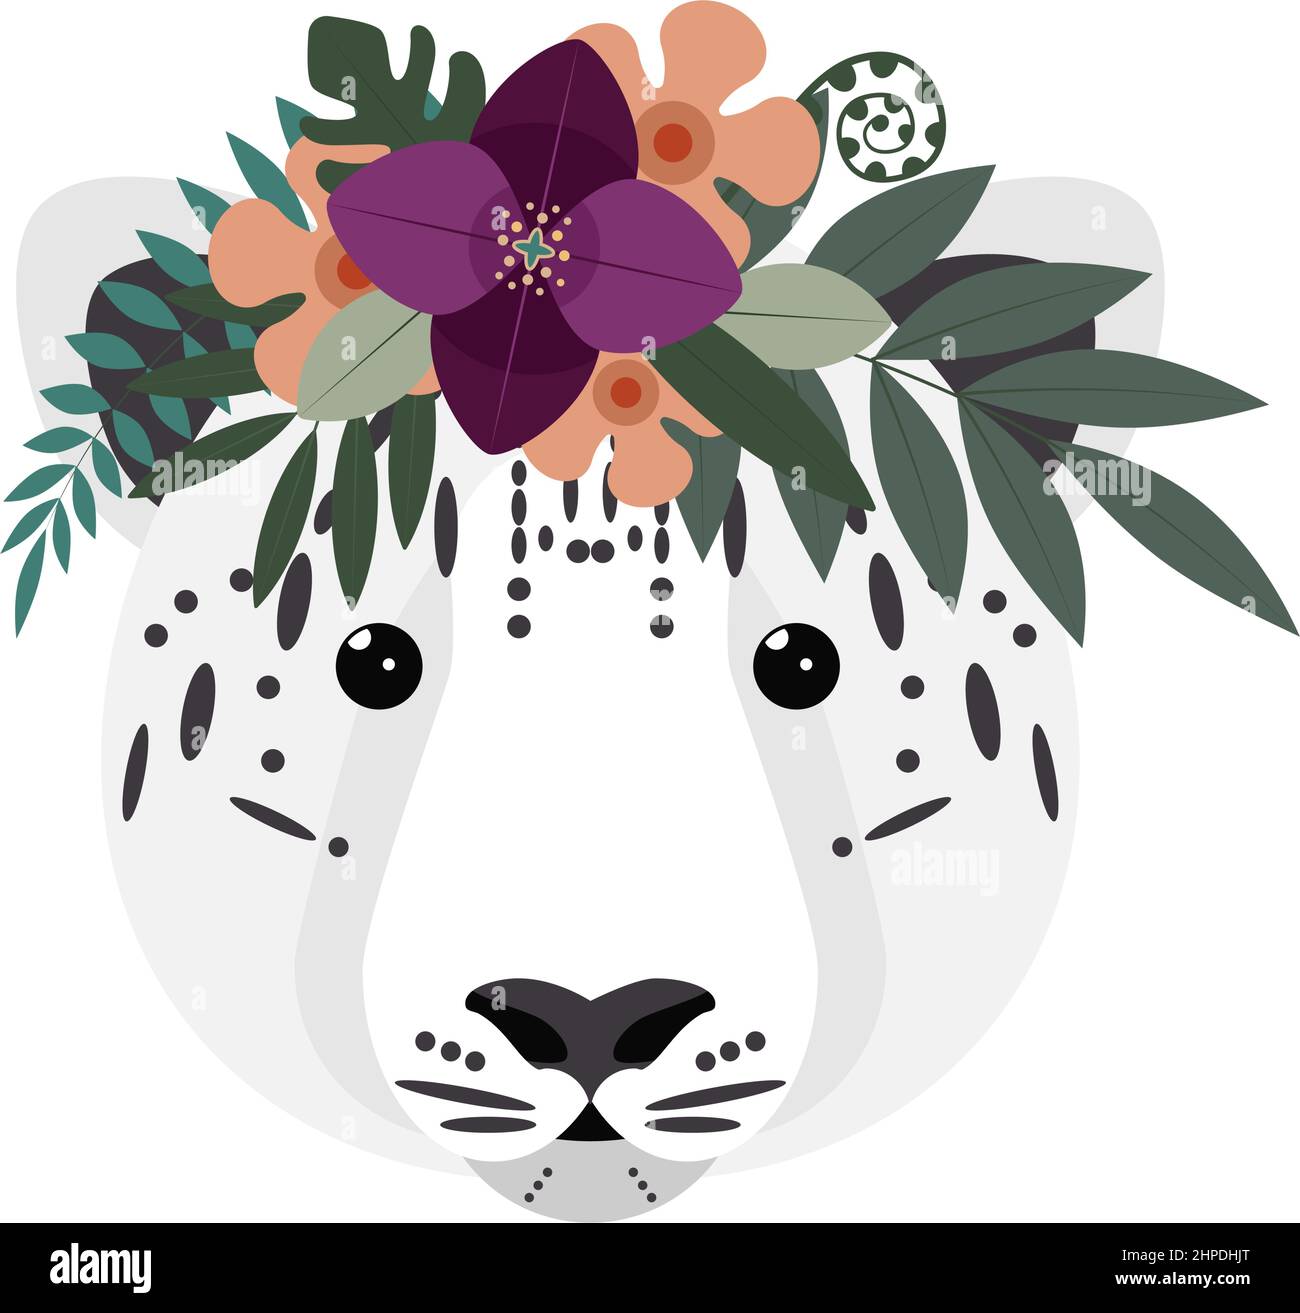 Snow leopard with flower crown. Snow leopard character, flower crown stickers. Stock Vector